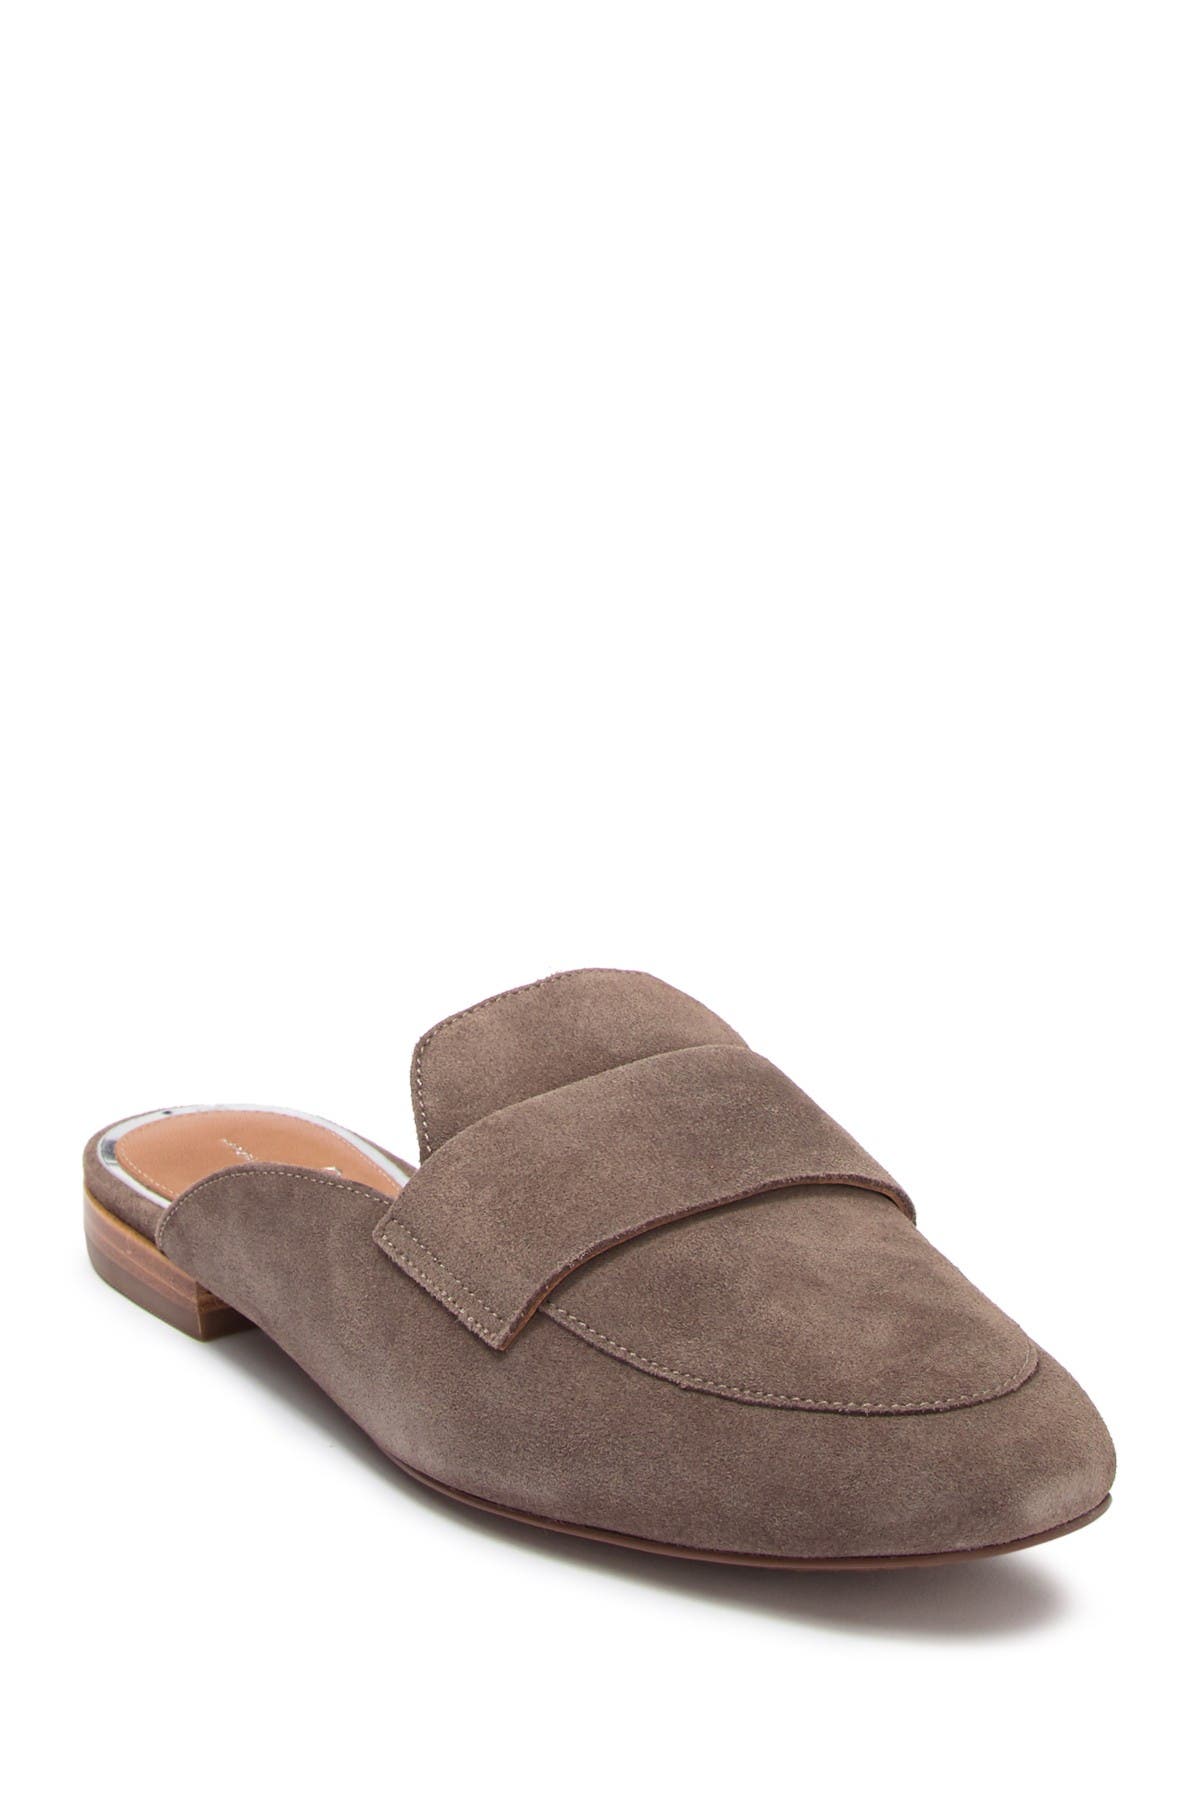 linea paolo annie loafer mule